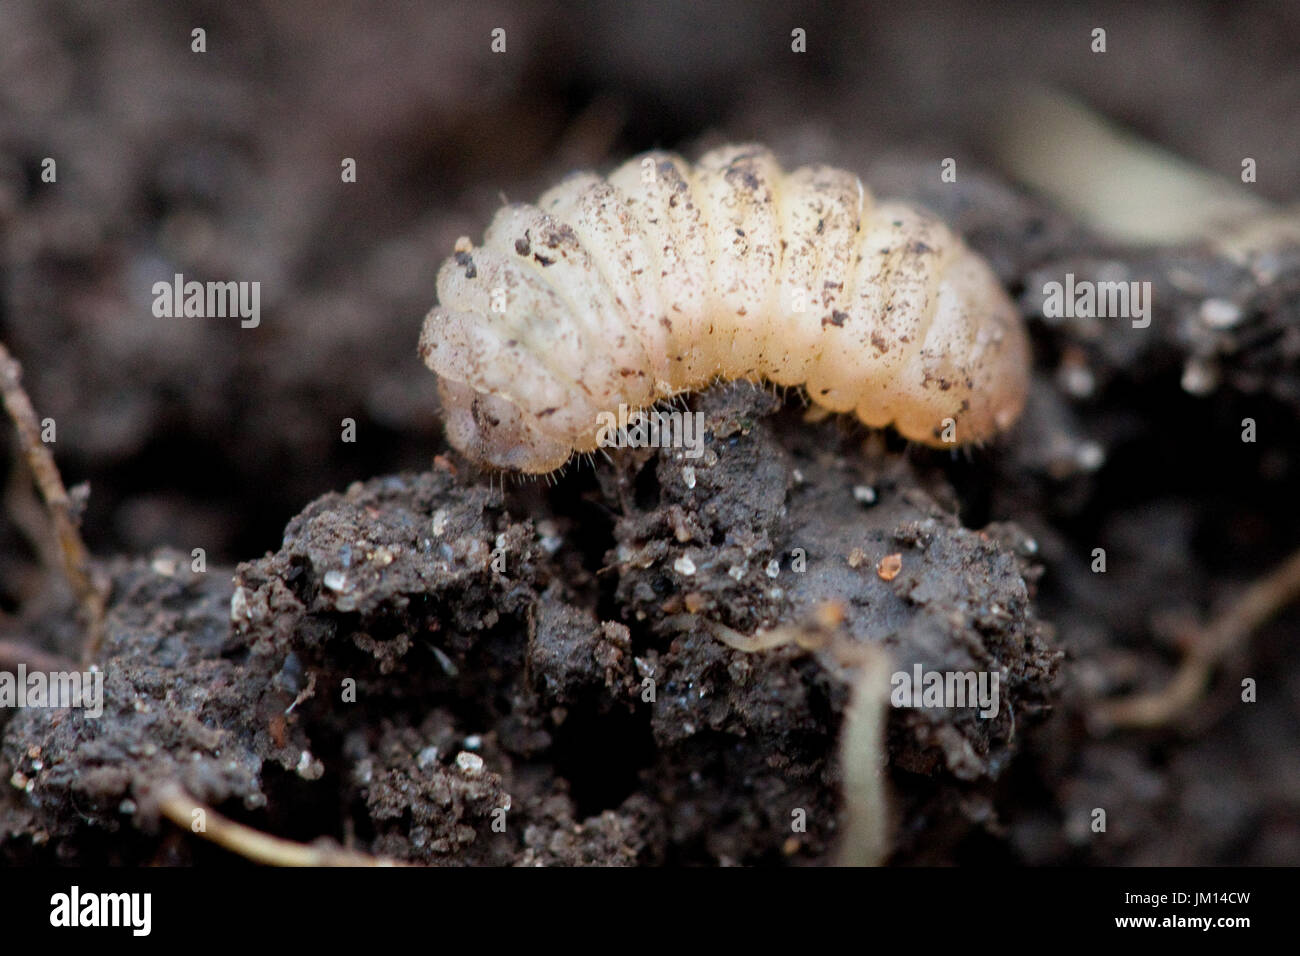 Fourth instar larva of the endangered Large Blue butterfly (Maculinea arion). Stock Photo